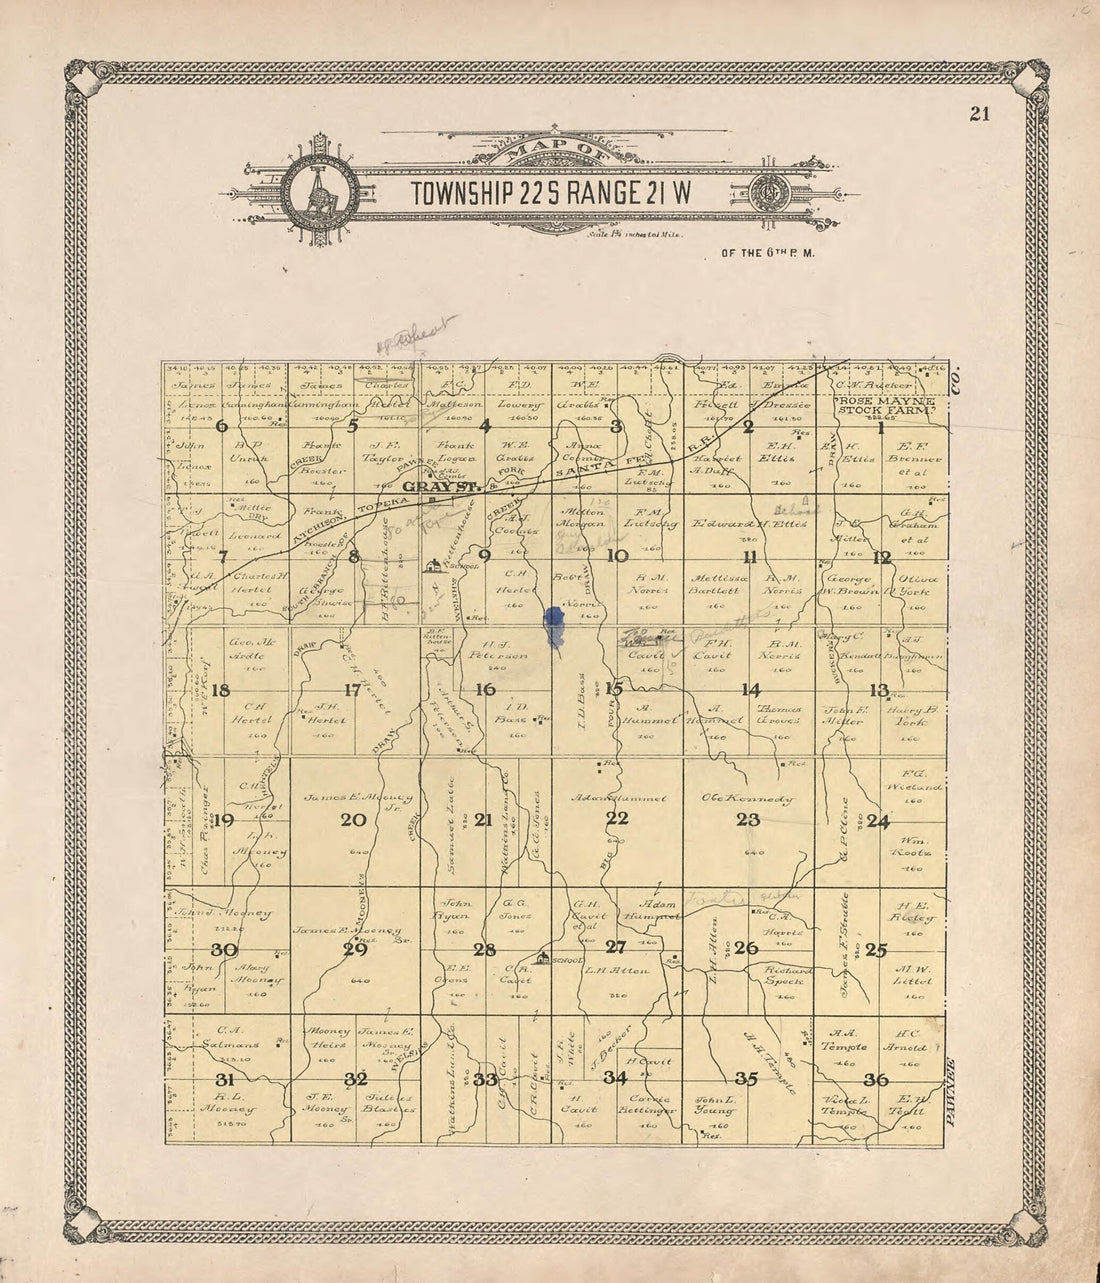 This old map of Map of Township 22 S Range 21 W from Standard Atlas of Hodgeman County, Kansas from 1907 was created by  Geo. A. Ogle &amp; Co in 1907